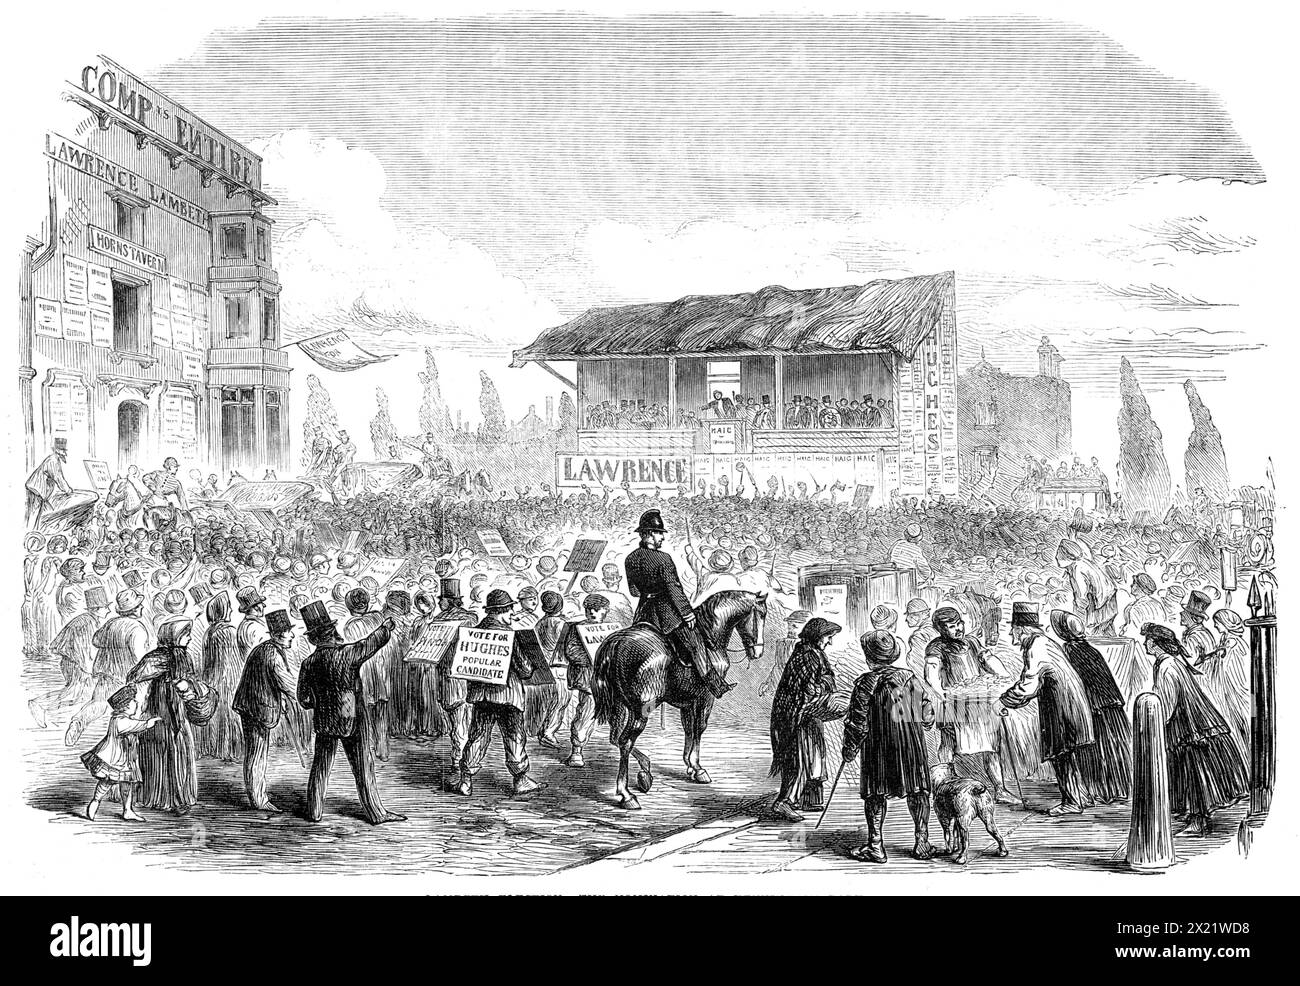 The Elections in the Metropolitan Boroughs: Lambeth election: the nomination at Kennington Park, [London], 1865. View in front of the main entrance to Kennington Park. 'In Lambeth the returning officer, Mr. H. Onslow, presided at the nomination. Mr. Frederick Doulton was proposed by Dr. Evans and seconded by Mr. James Richardson; Alderman James Clark Lawrence was proposed by Mr. R. Taylor and seconded by Mr. Lyon; Mr. Thomas Hughes was proposed by Mr. G. T. Wilson and seconded by Mr. Stuart Barker; Mr. James Haig was proposed by Mr. F. Fowler and seconded by Mr. Reynell. Mr. Doulton, Alderman Stock Photo